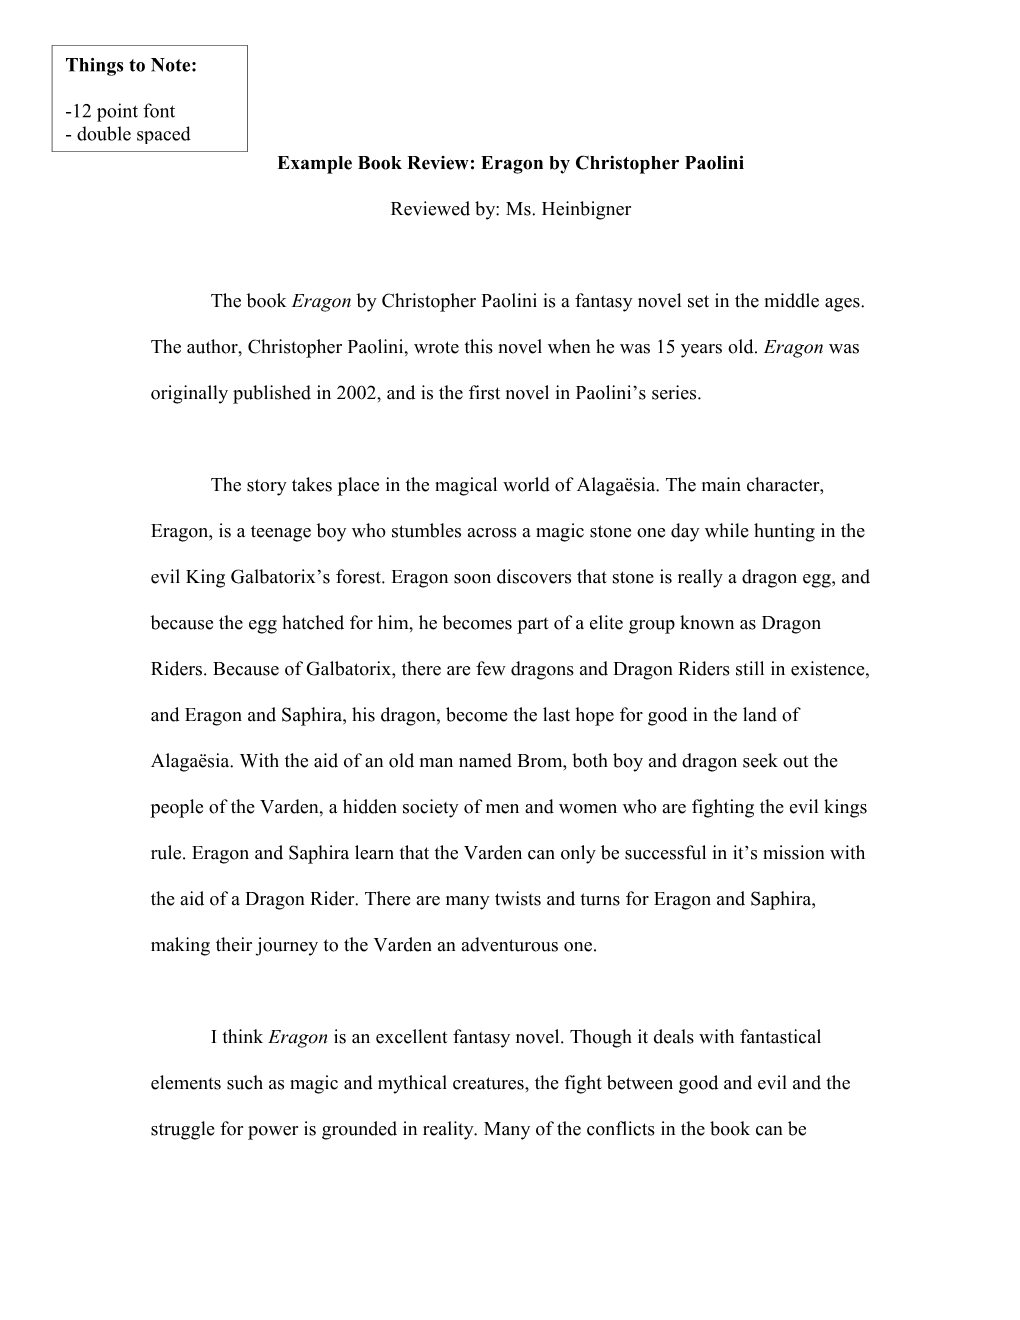 Example Book Review: Eragon by Christopher Paolini